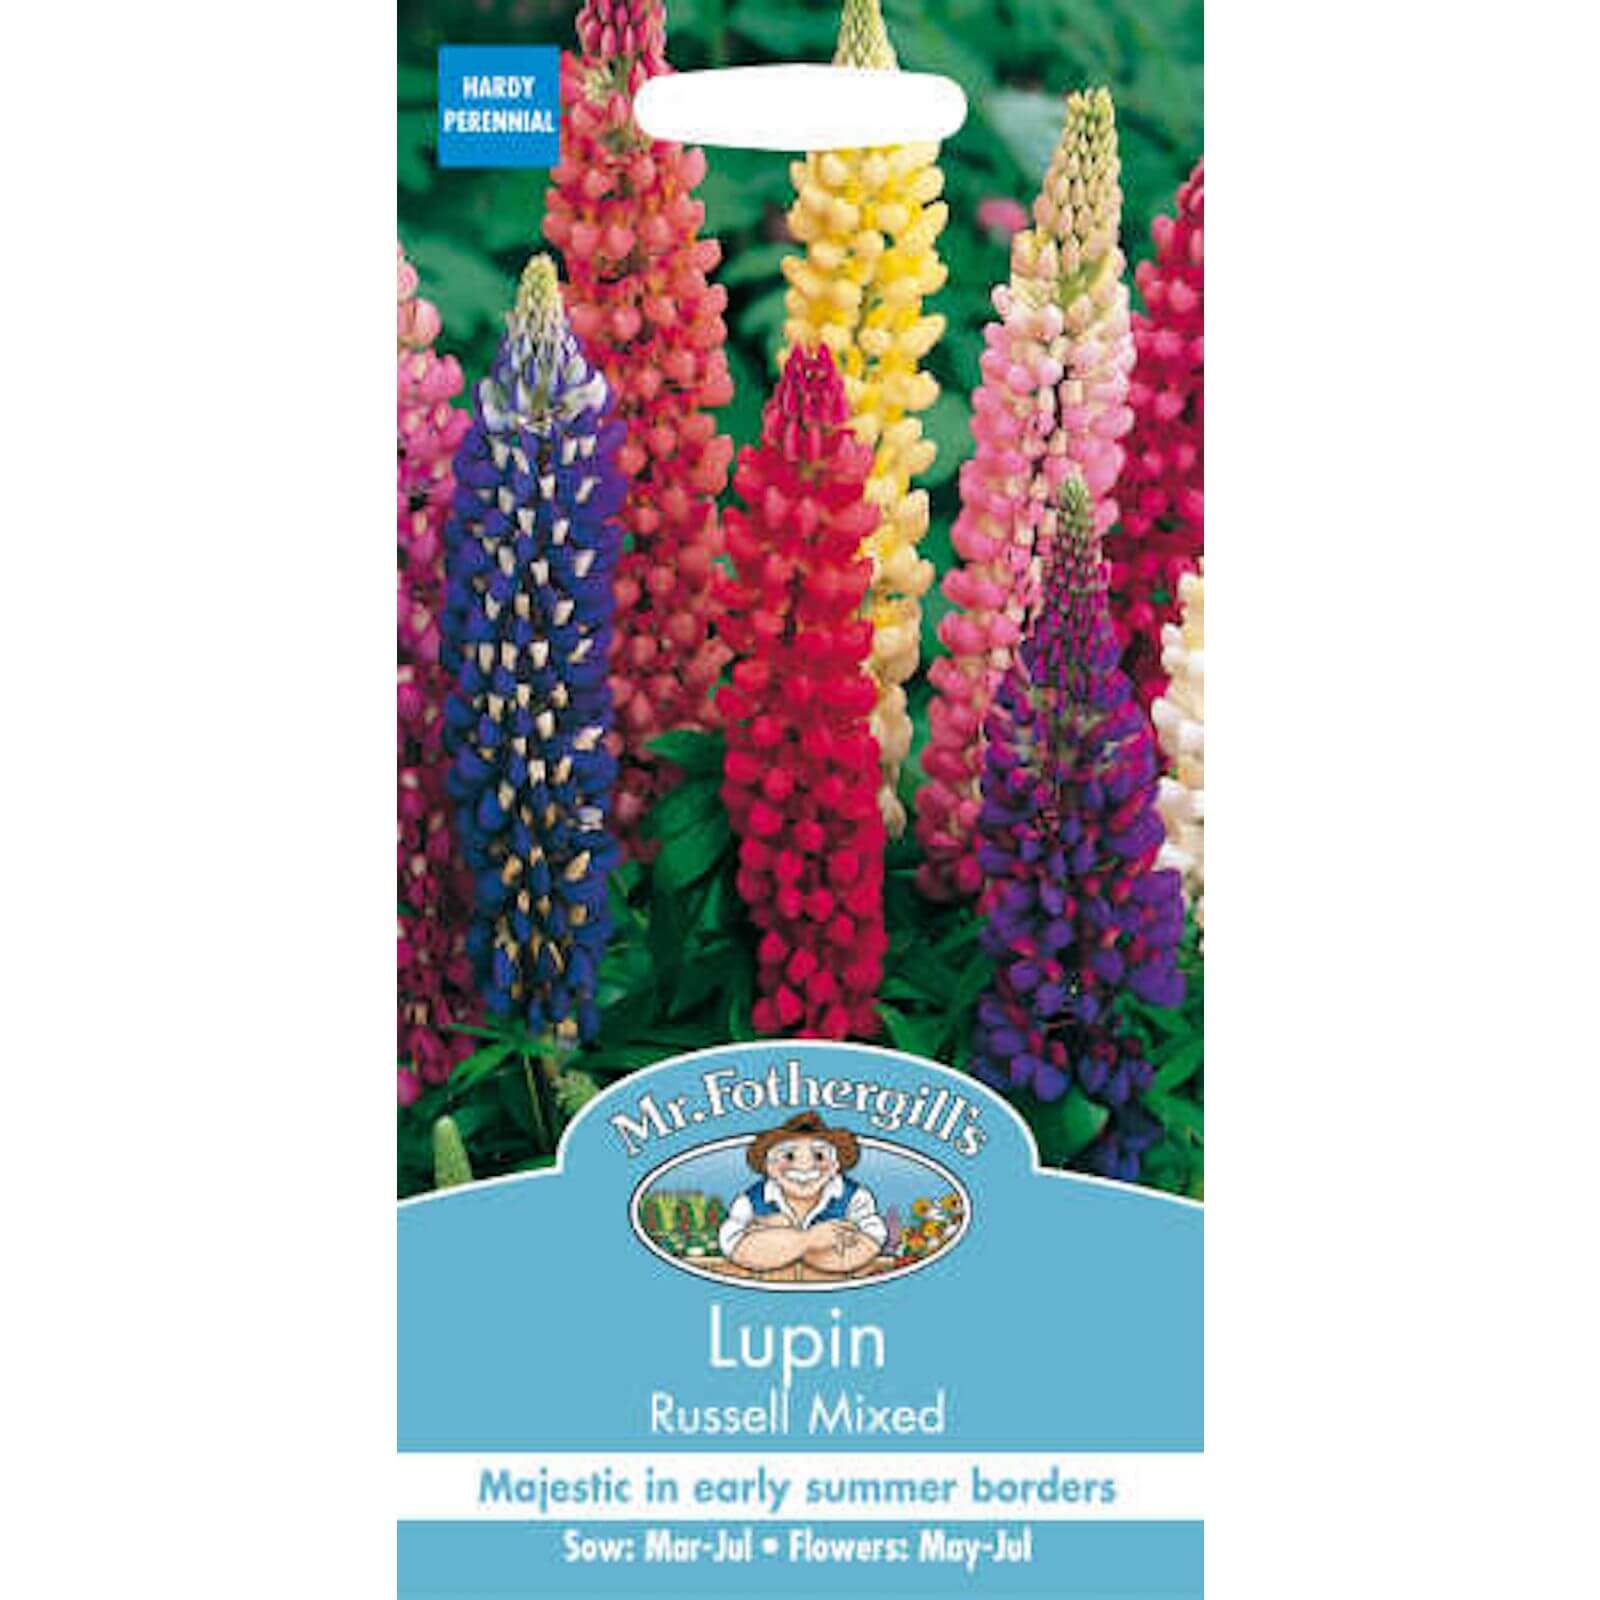 Mr. Fothergill's Lupin Russell Mixed (Lupinus Polyphyllus) Seeds